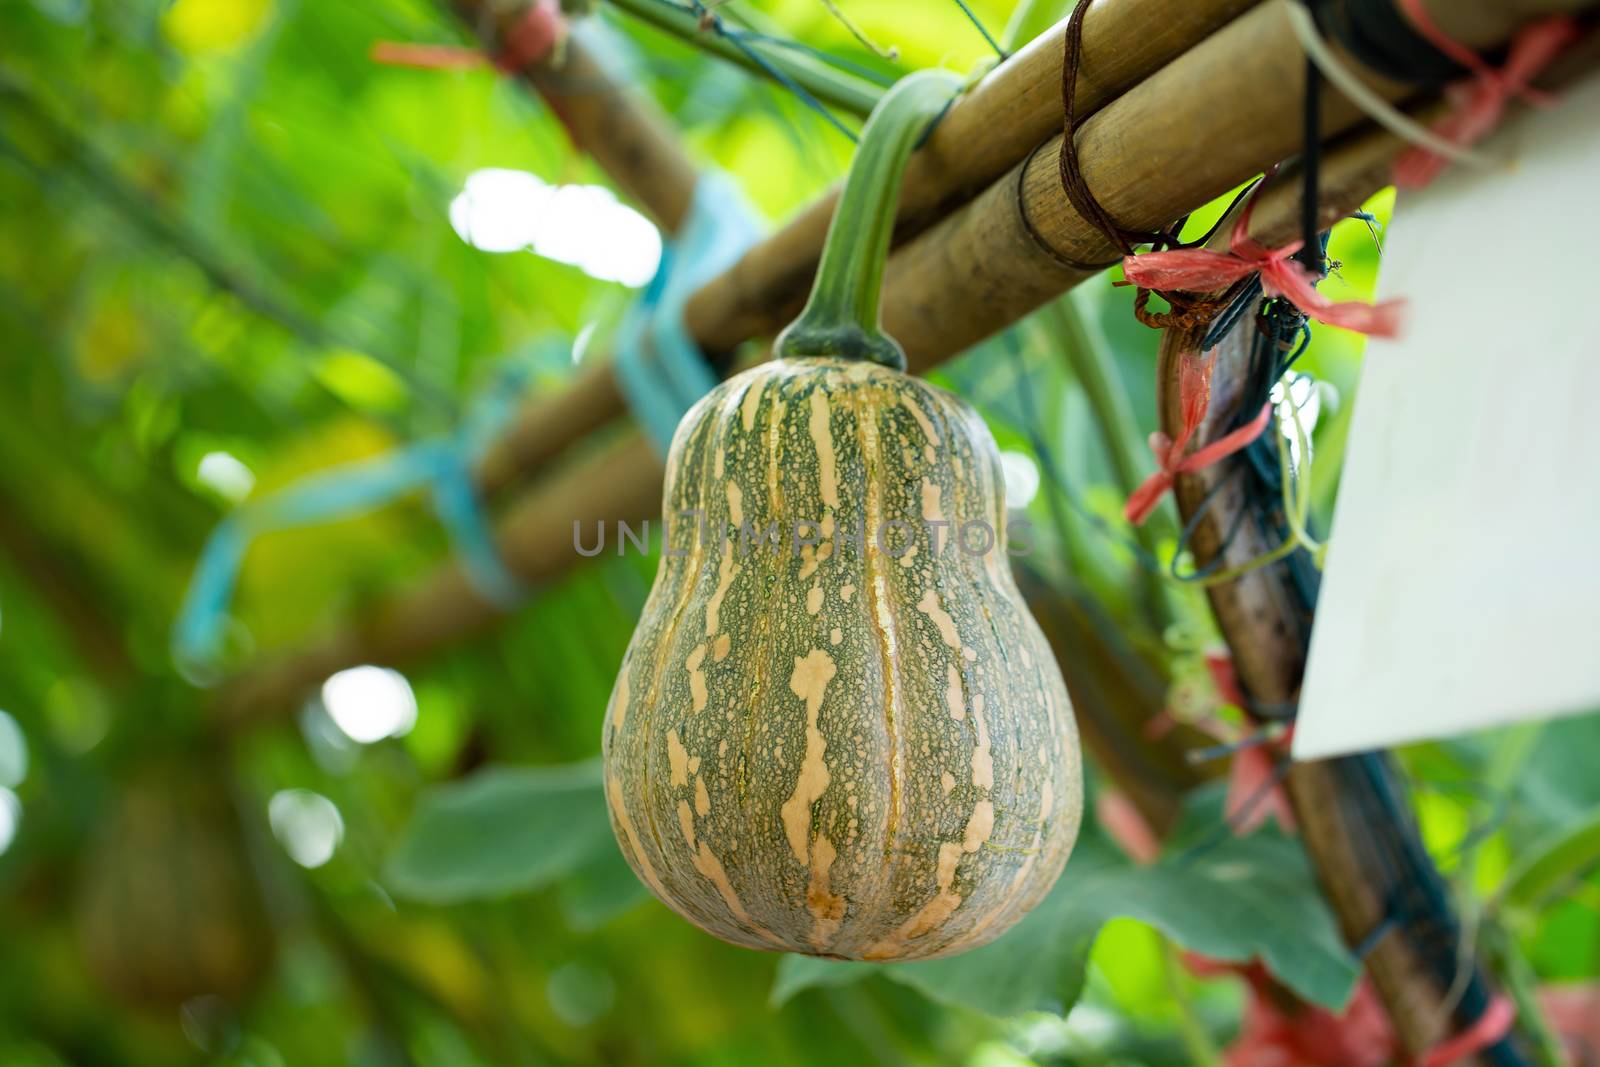 pumpkins hanging from the bamboo fence  in the garden by kaiskynet